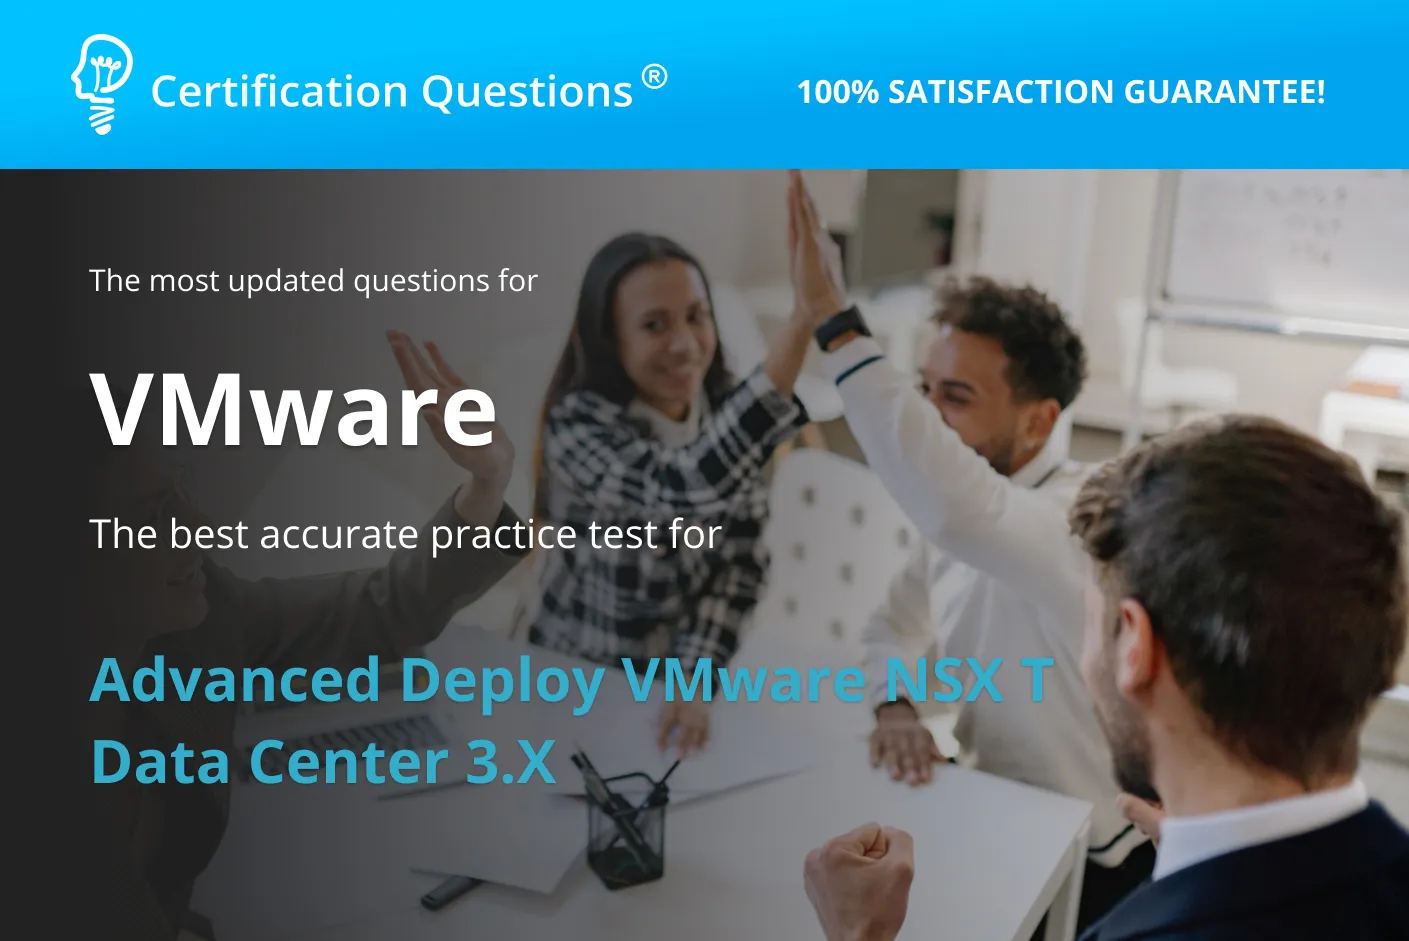 This image represents Advanced deploy VMWARE NSX-T data center practice test